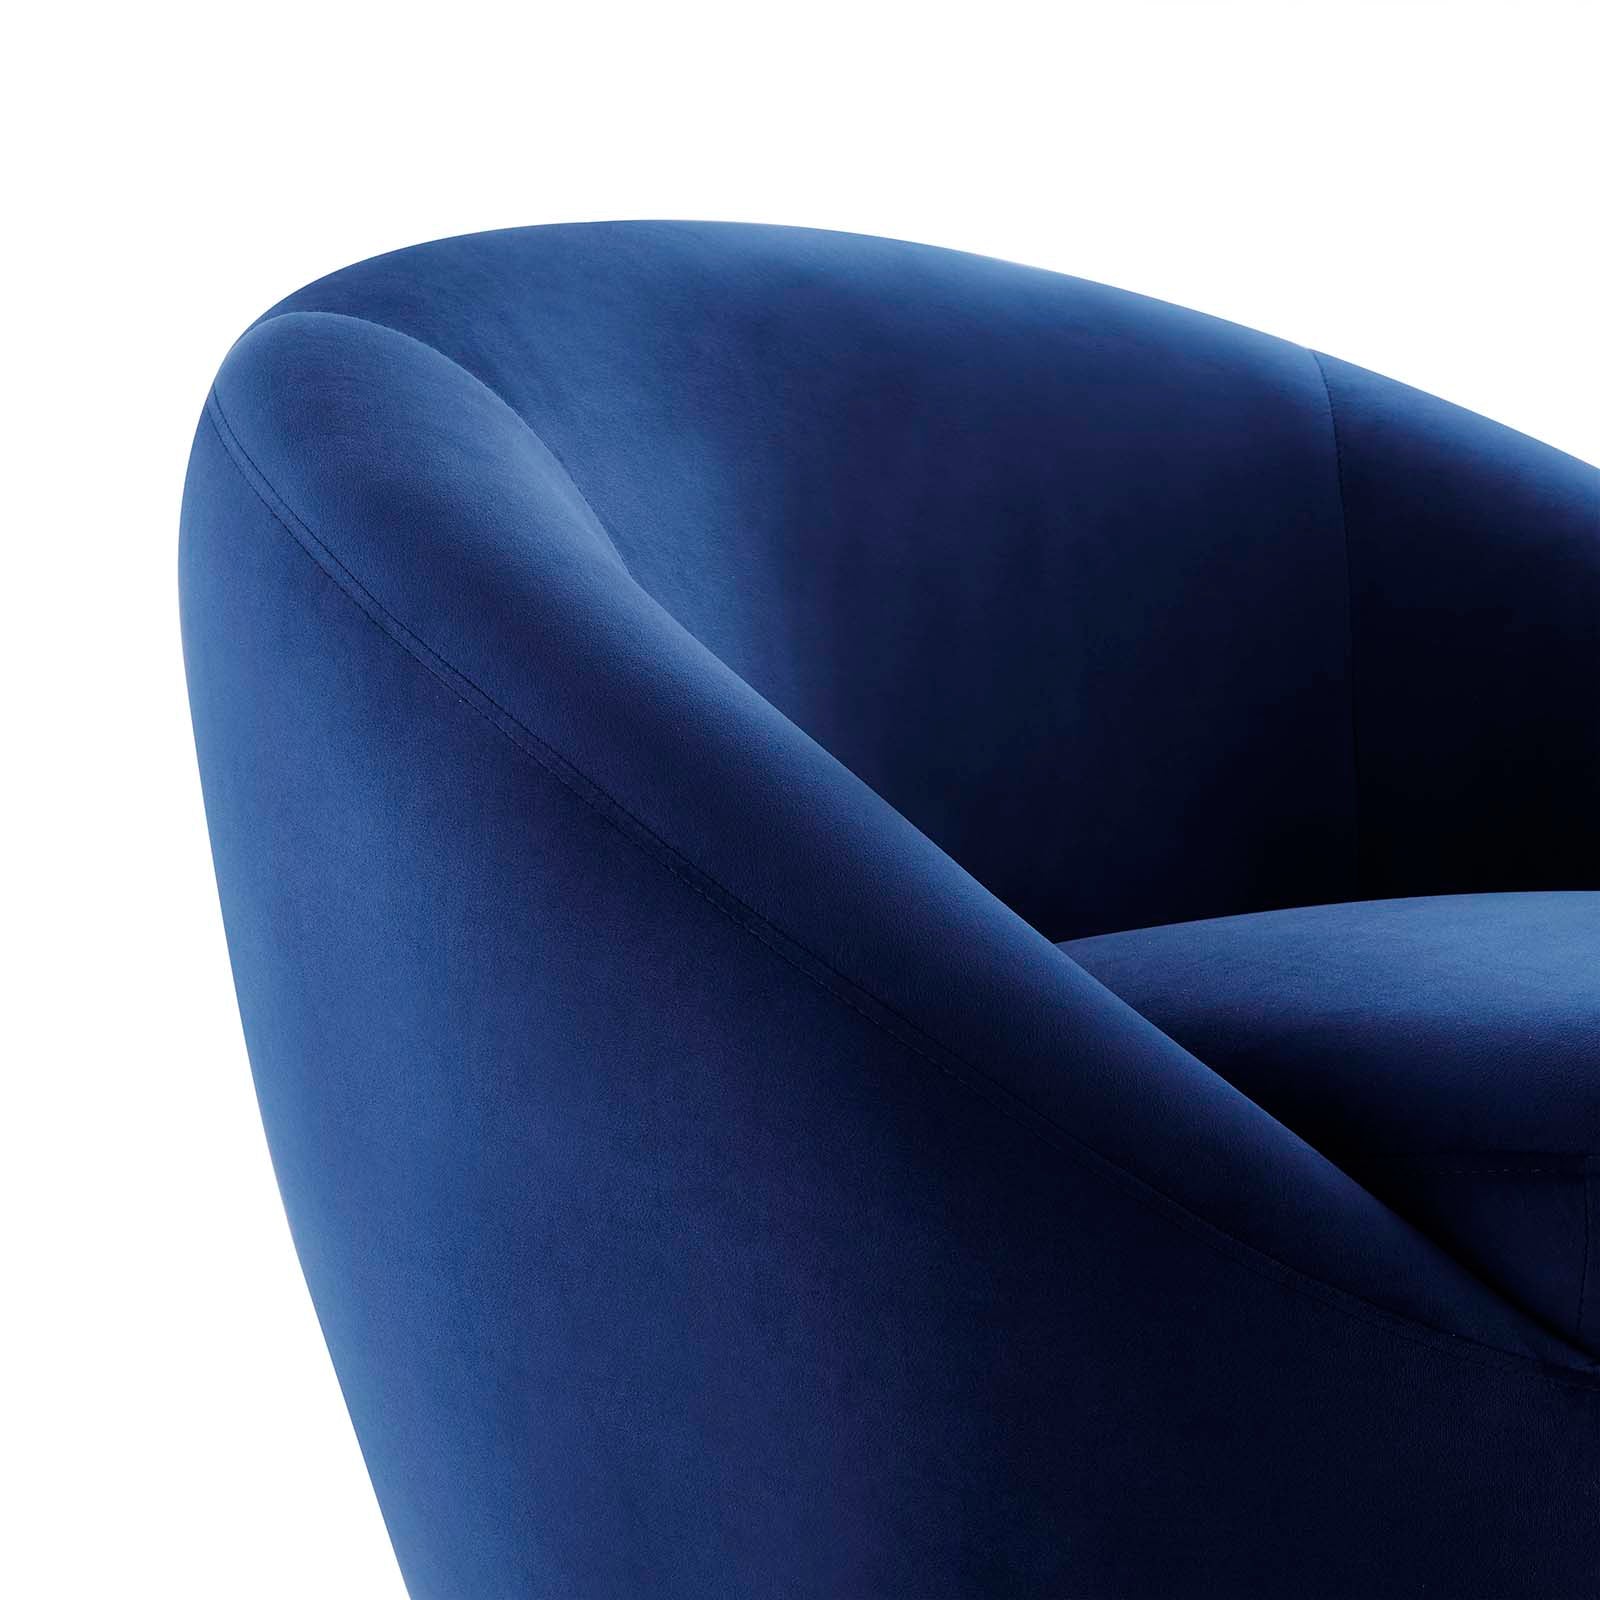 Modway Accent Chairs - Buttercup Performance Velvet Performance Velvet Swivel Chair Black Navy